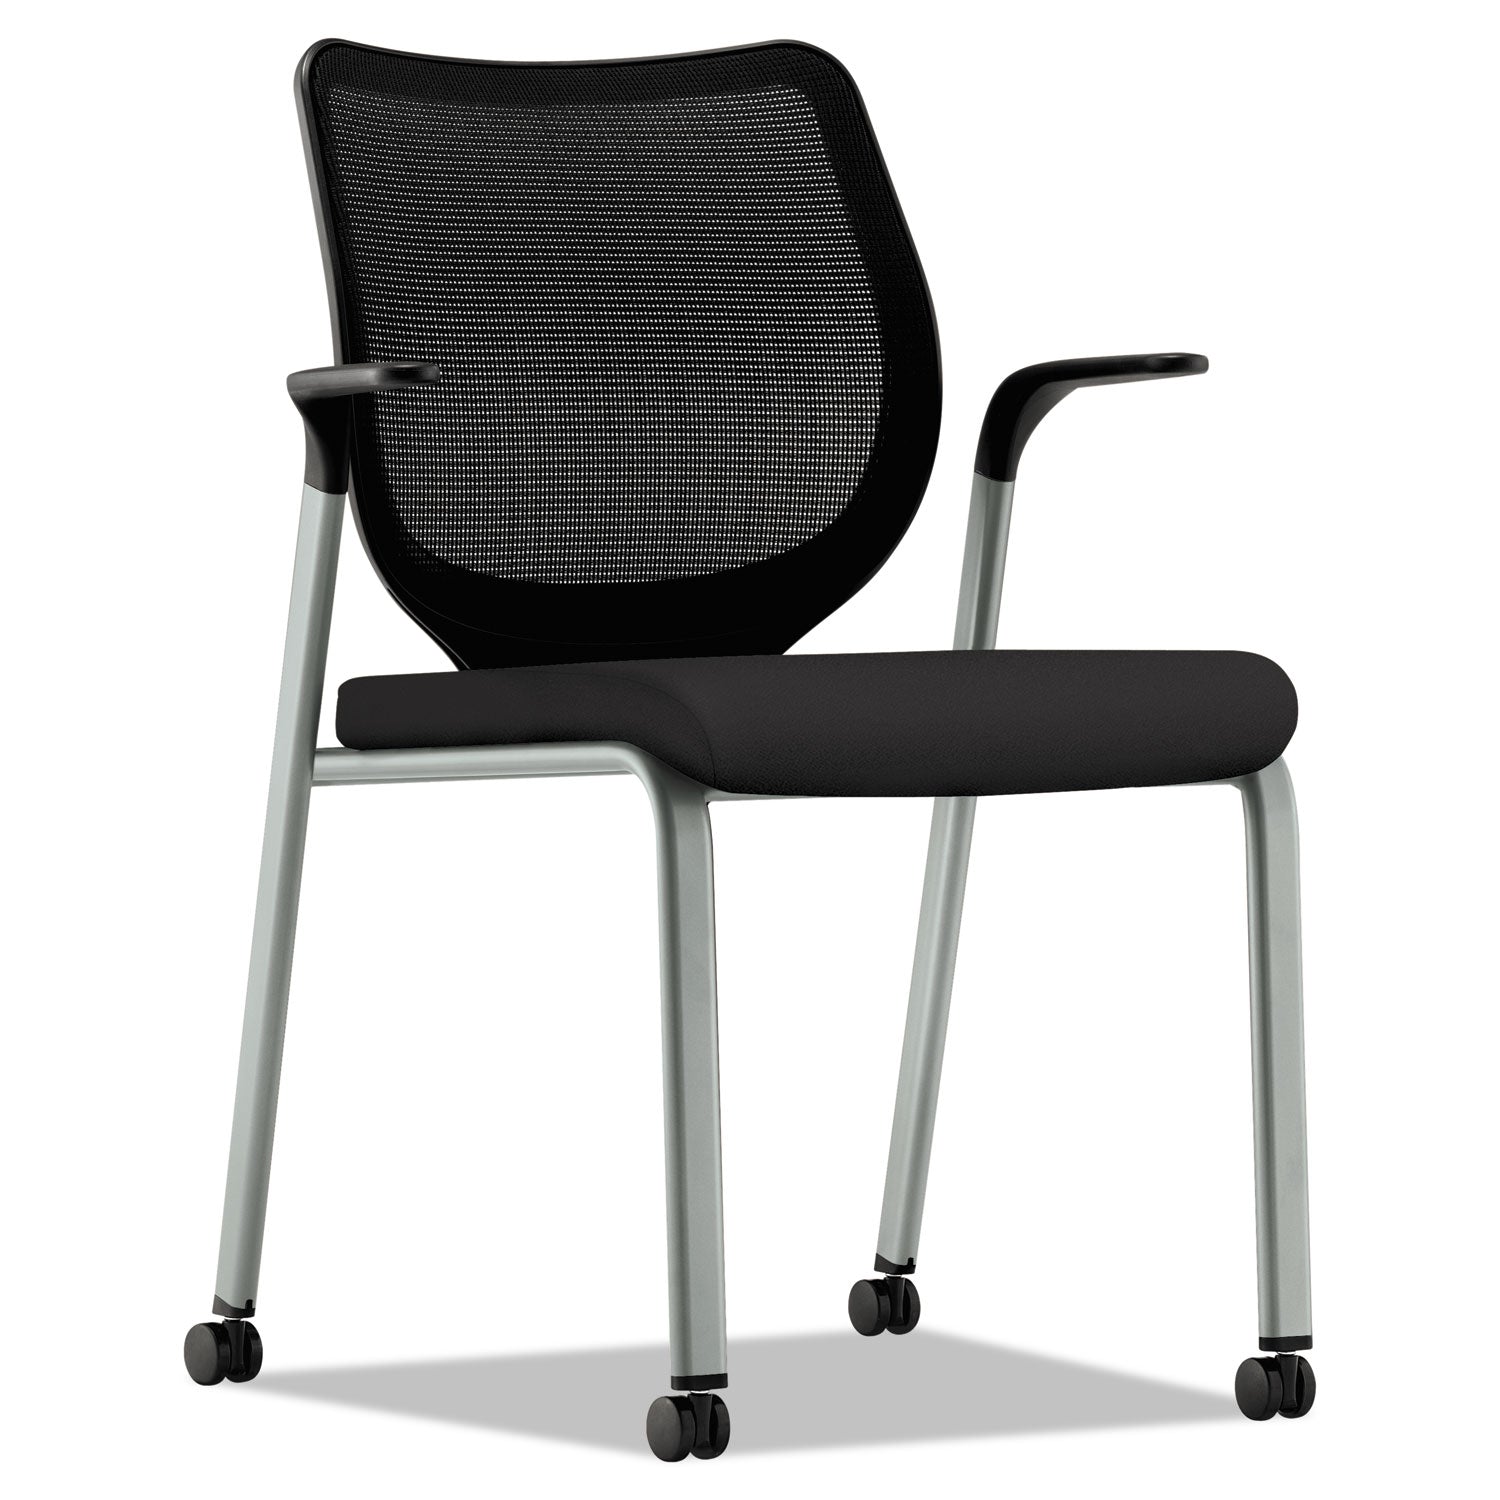 nucleus-series-multipurpose-stacking-chair-with-ilira-stretch-m4-back-supports-up-to-300-lb-black-seat-back-platinum-base_honn606hcu10t1 - 1